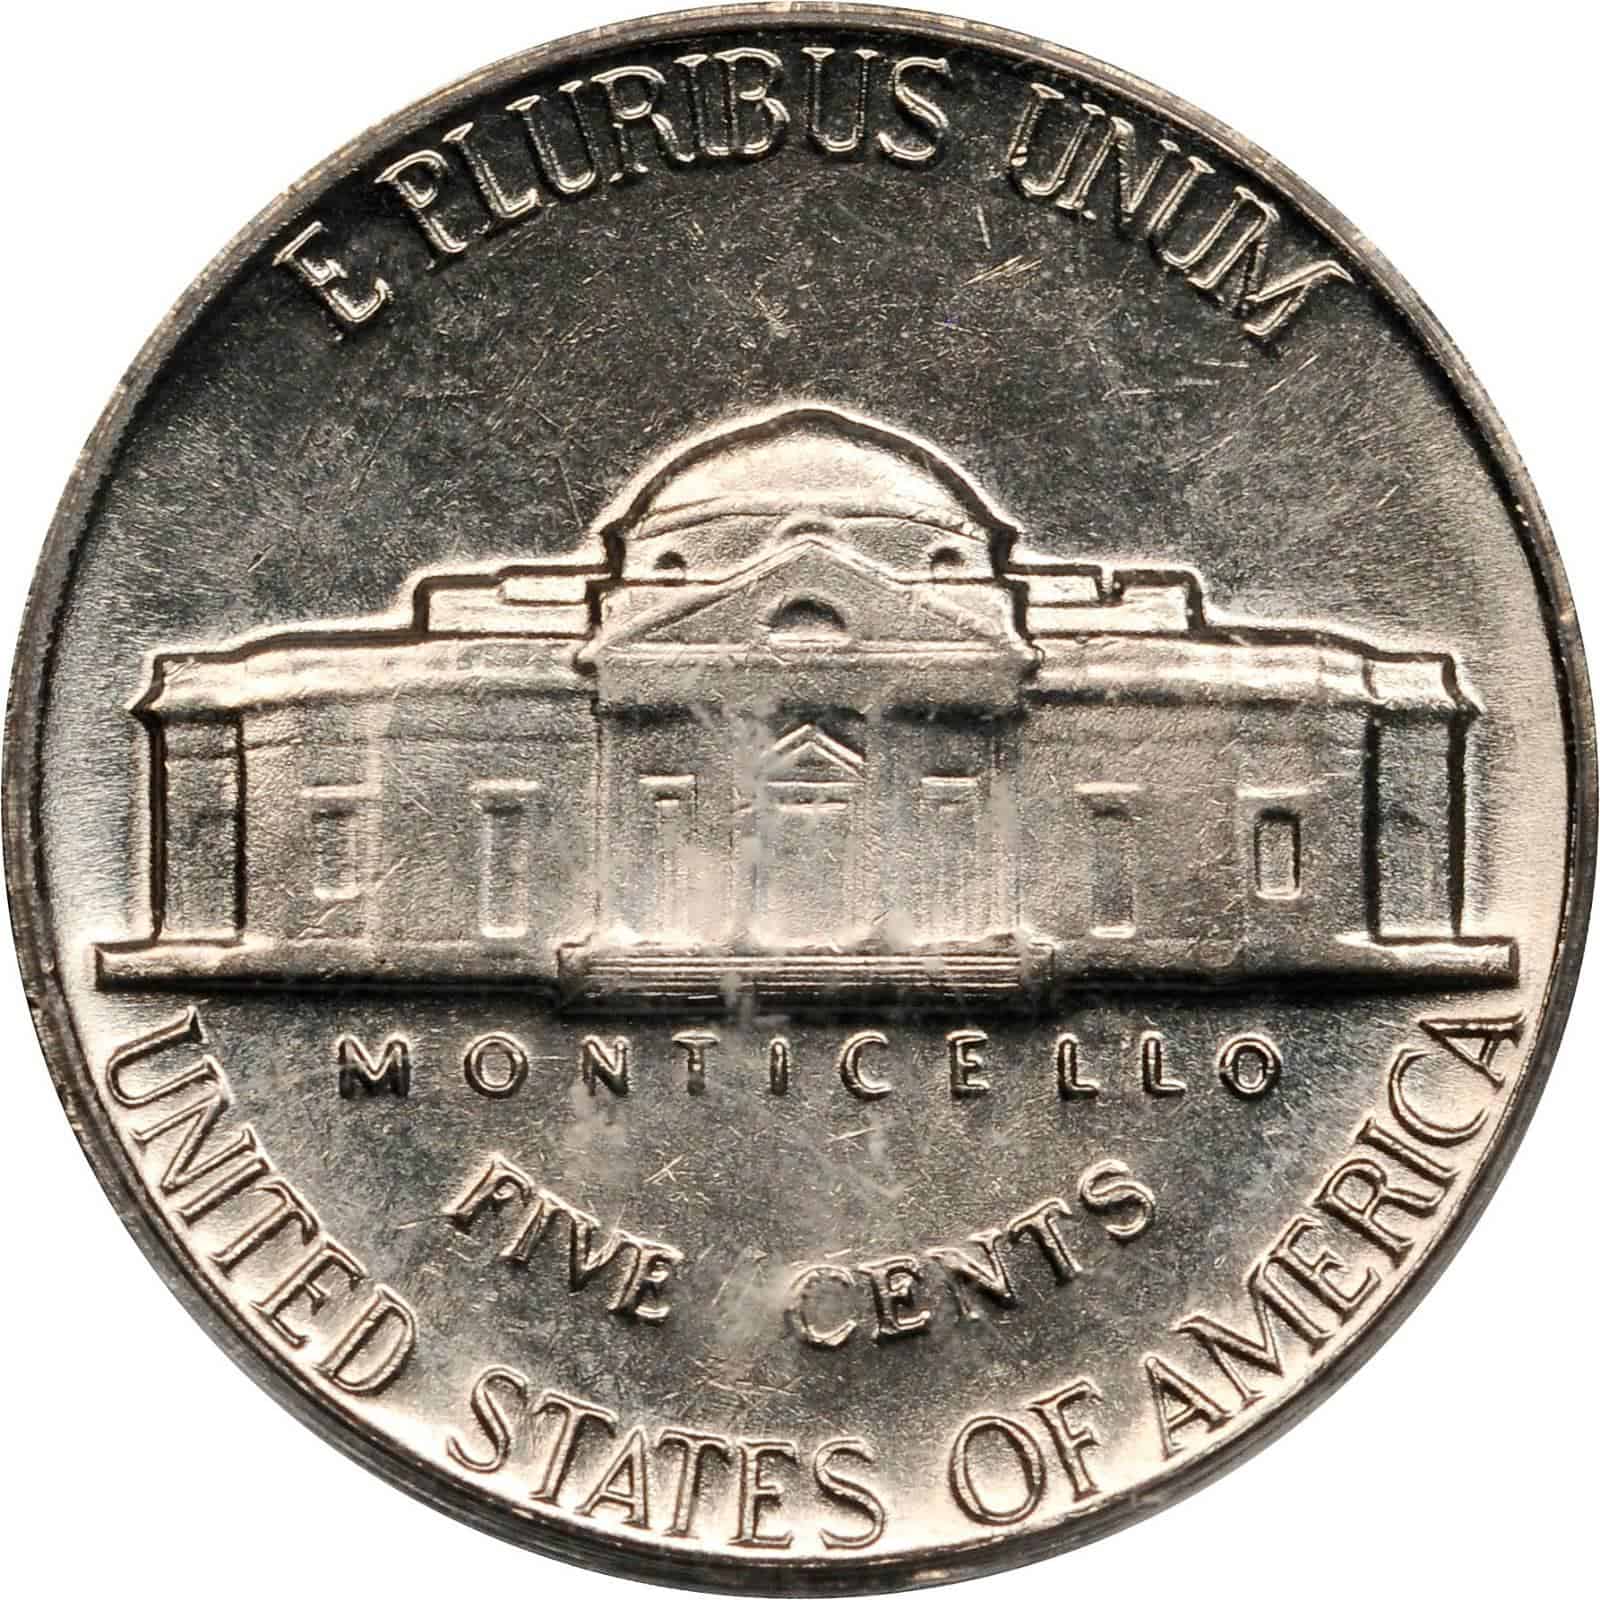 The reverse of the 1970 Jefferson nickel